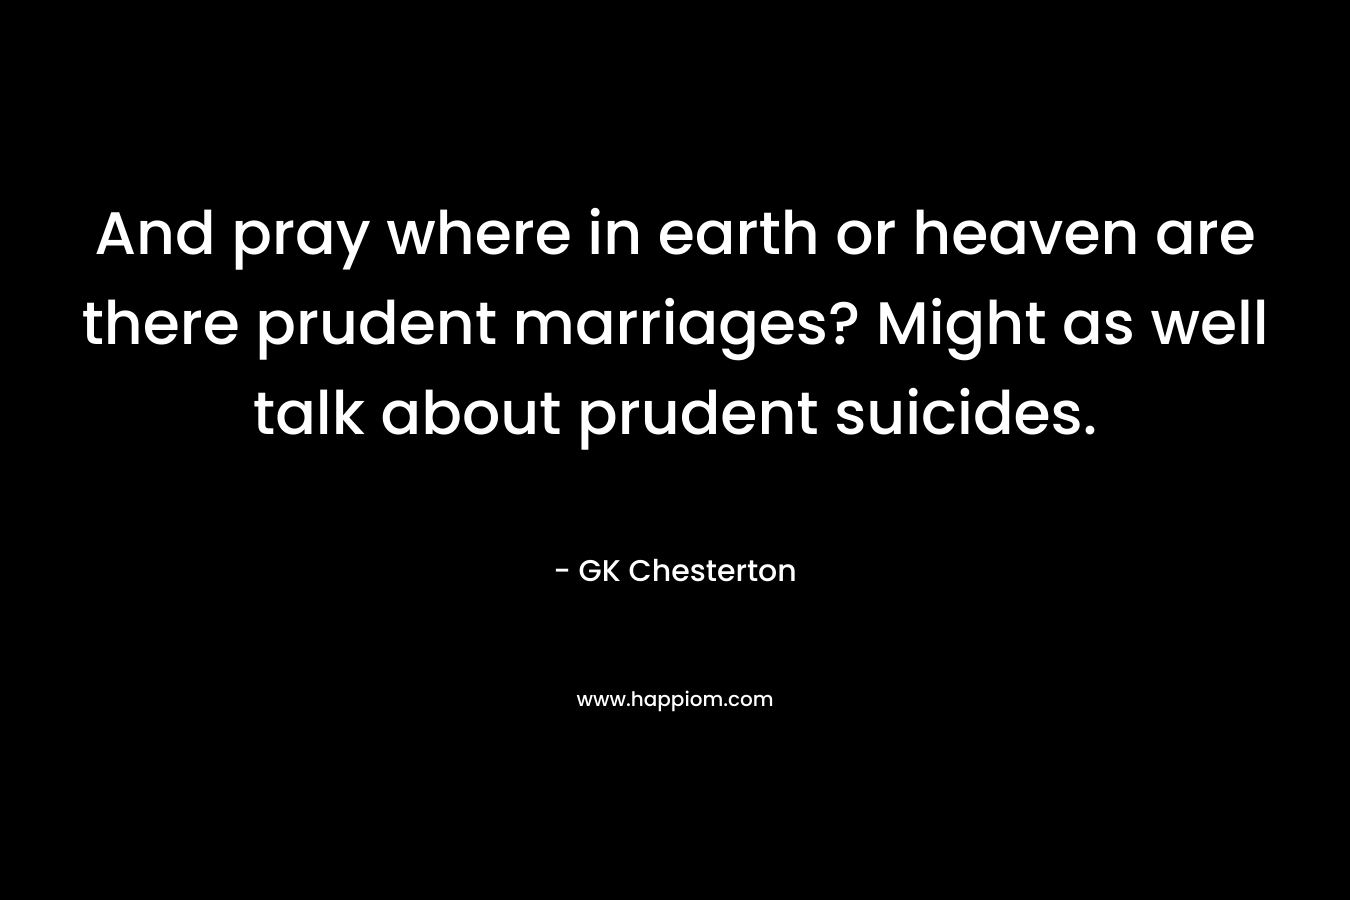 And pray where in earth or heaven are there prudent marriages? Might as well talk about prudent suicides. – GK Chesterton